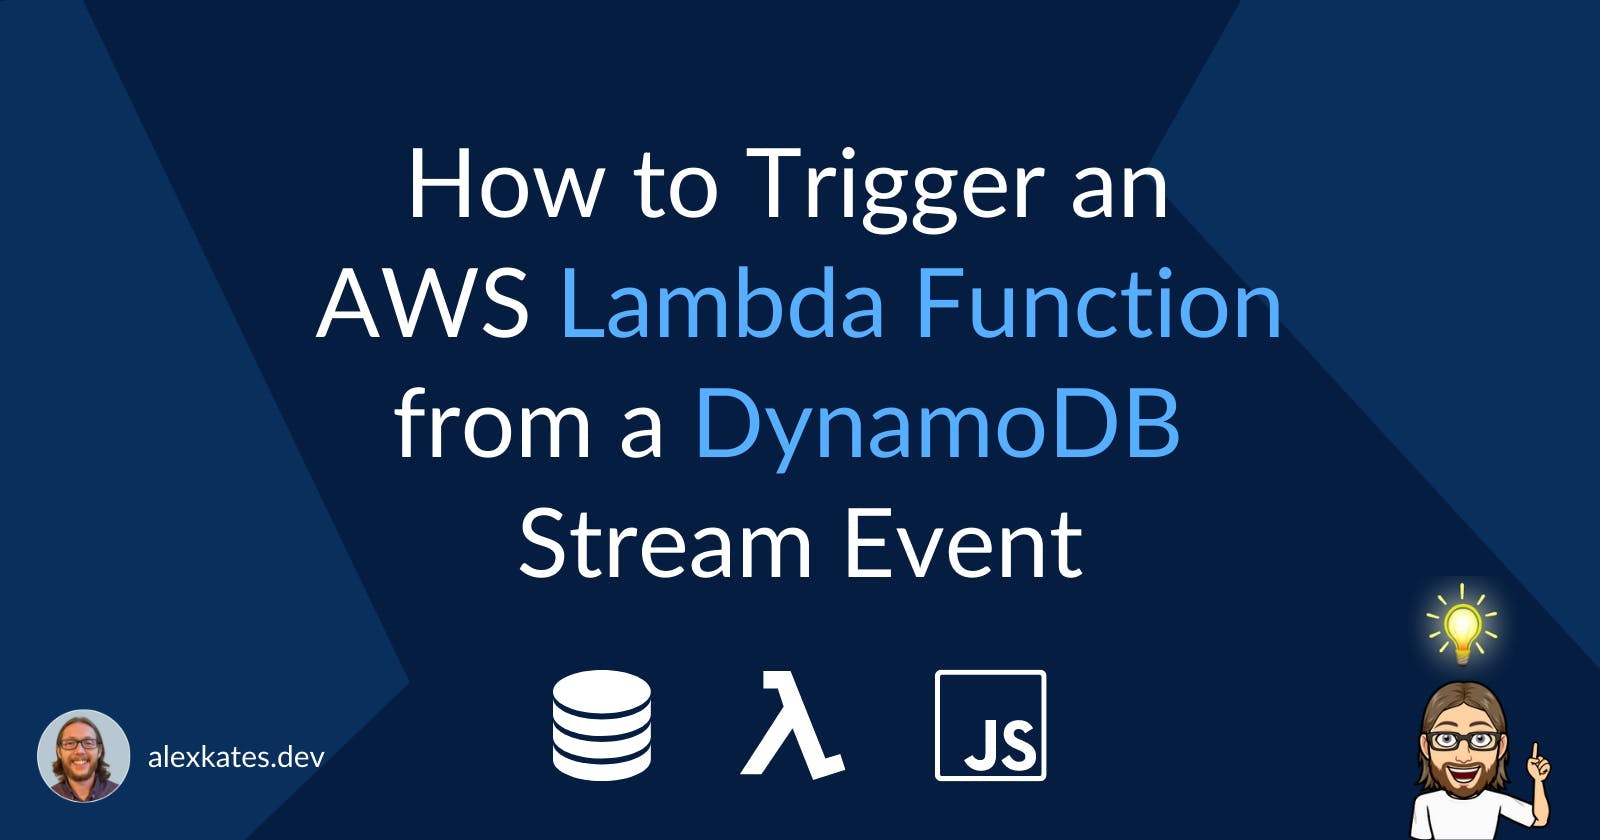 How to Trigger an AWS Lambda Function from a DynamoDB Stream Event